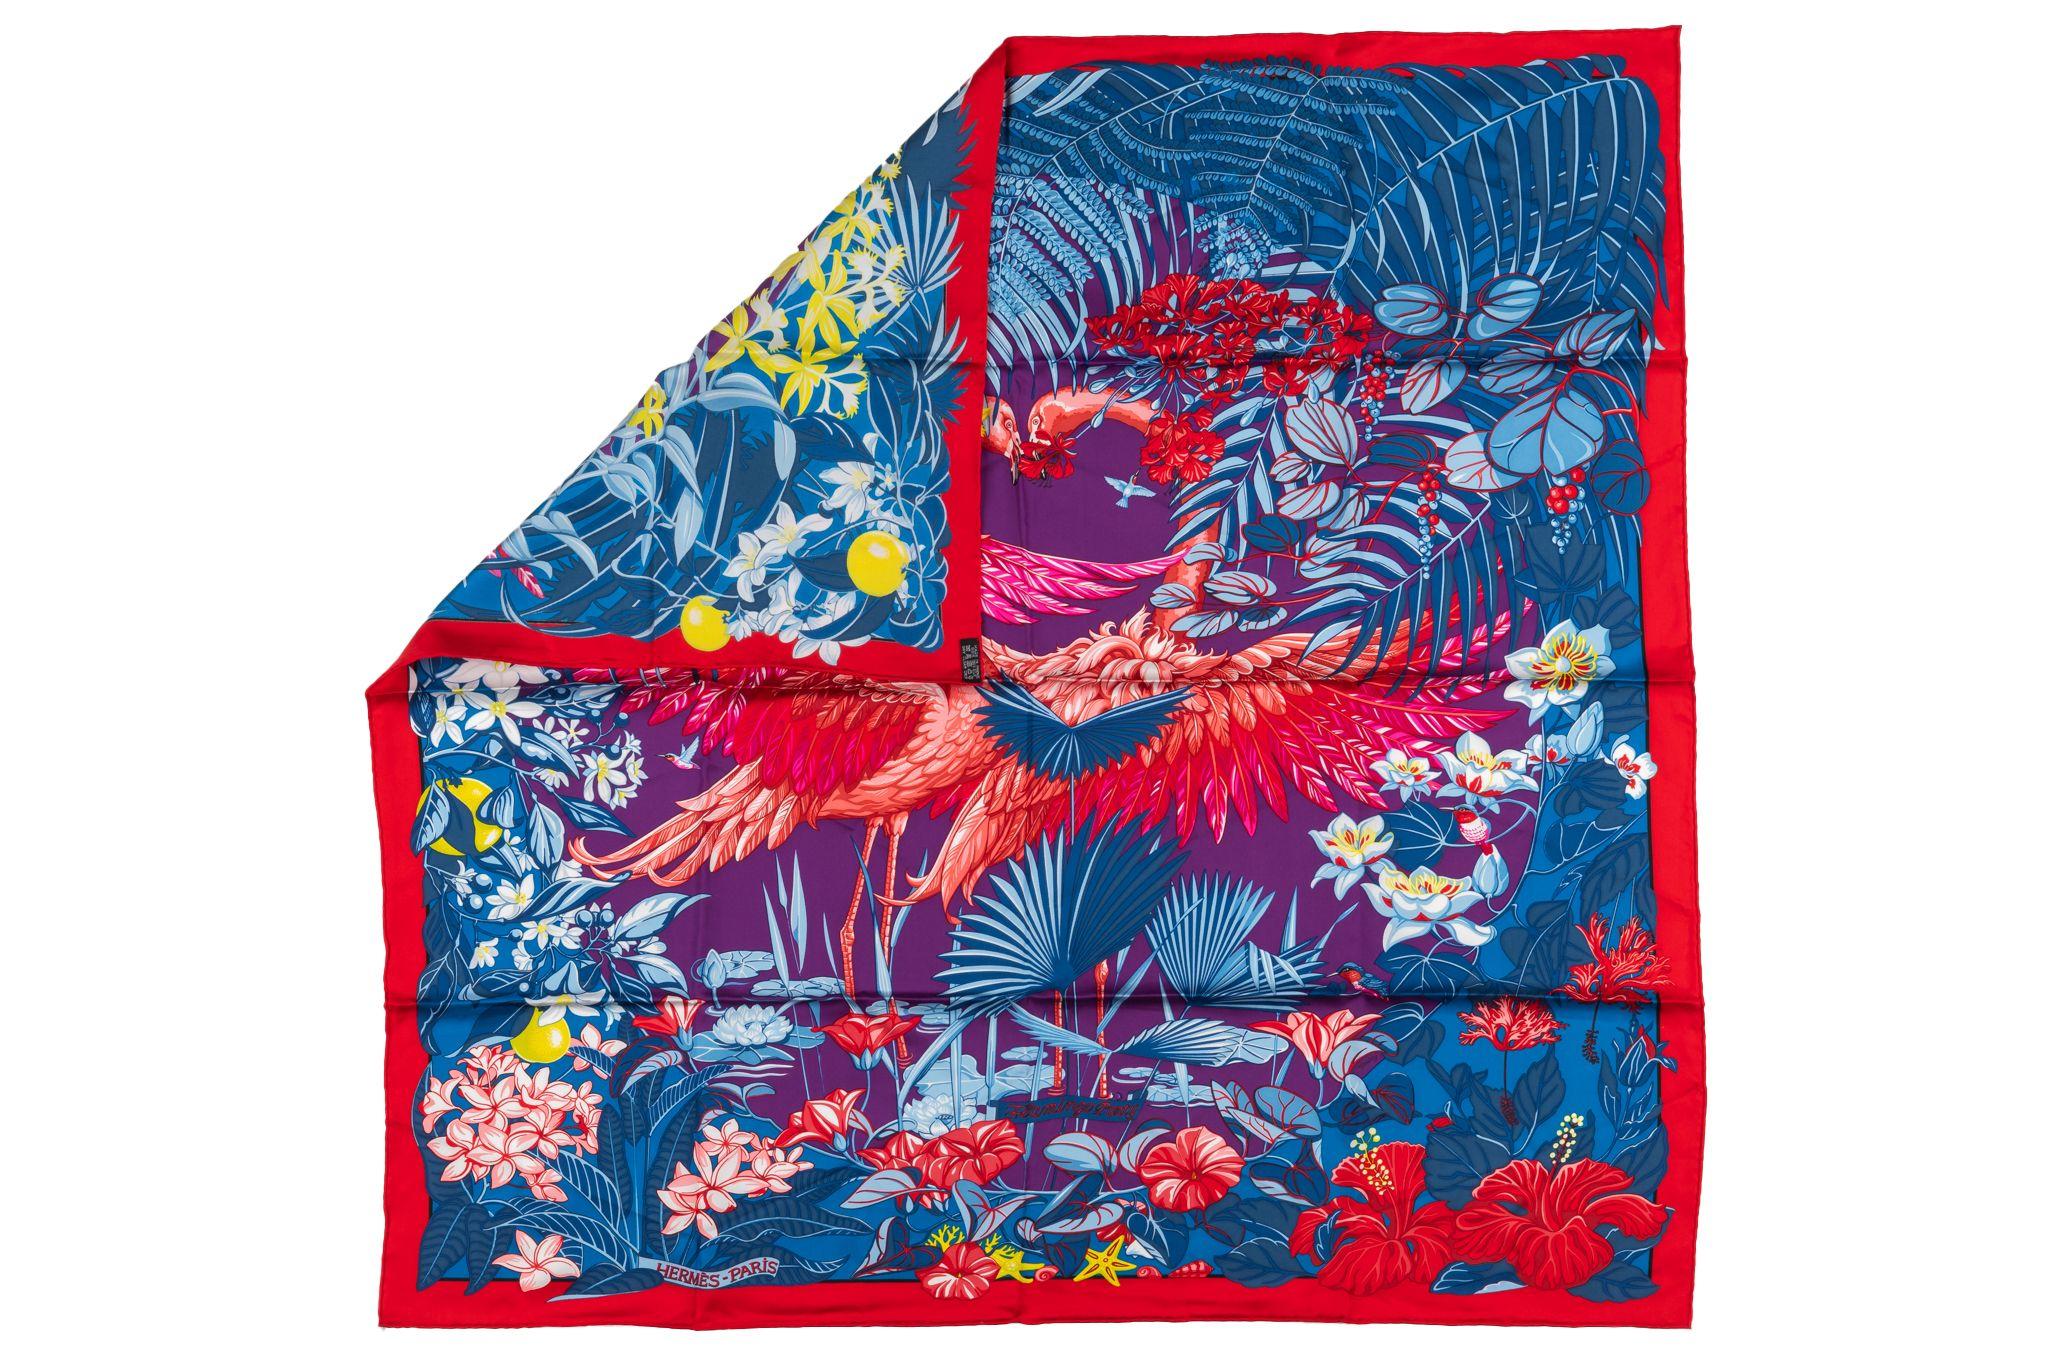 Hermes Flamingo Party silk Shawl. Fun and vibrant flamingo party motif. Features hand rolled hem. Comes with no box.